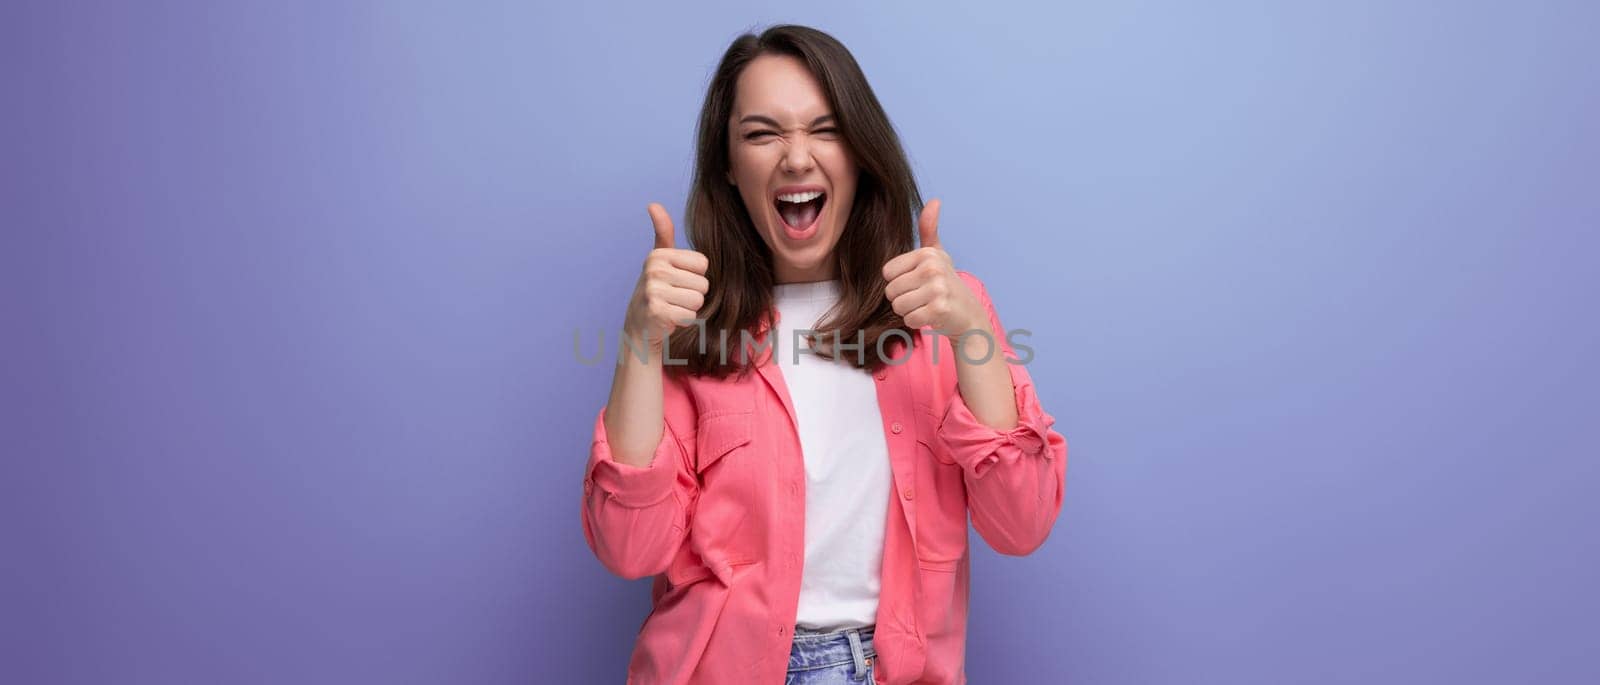 surprised brunette young woman in casual outfit smiling over isolated background.